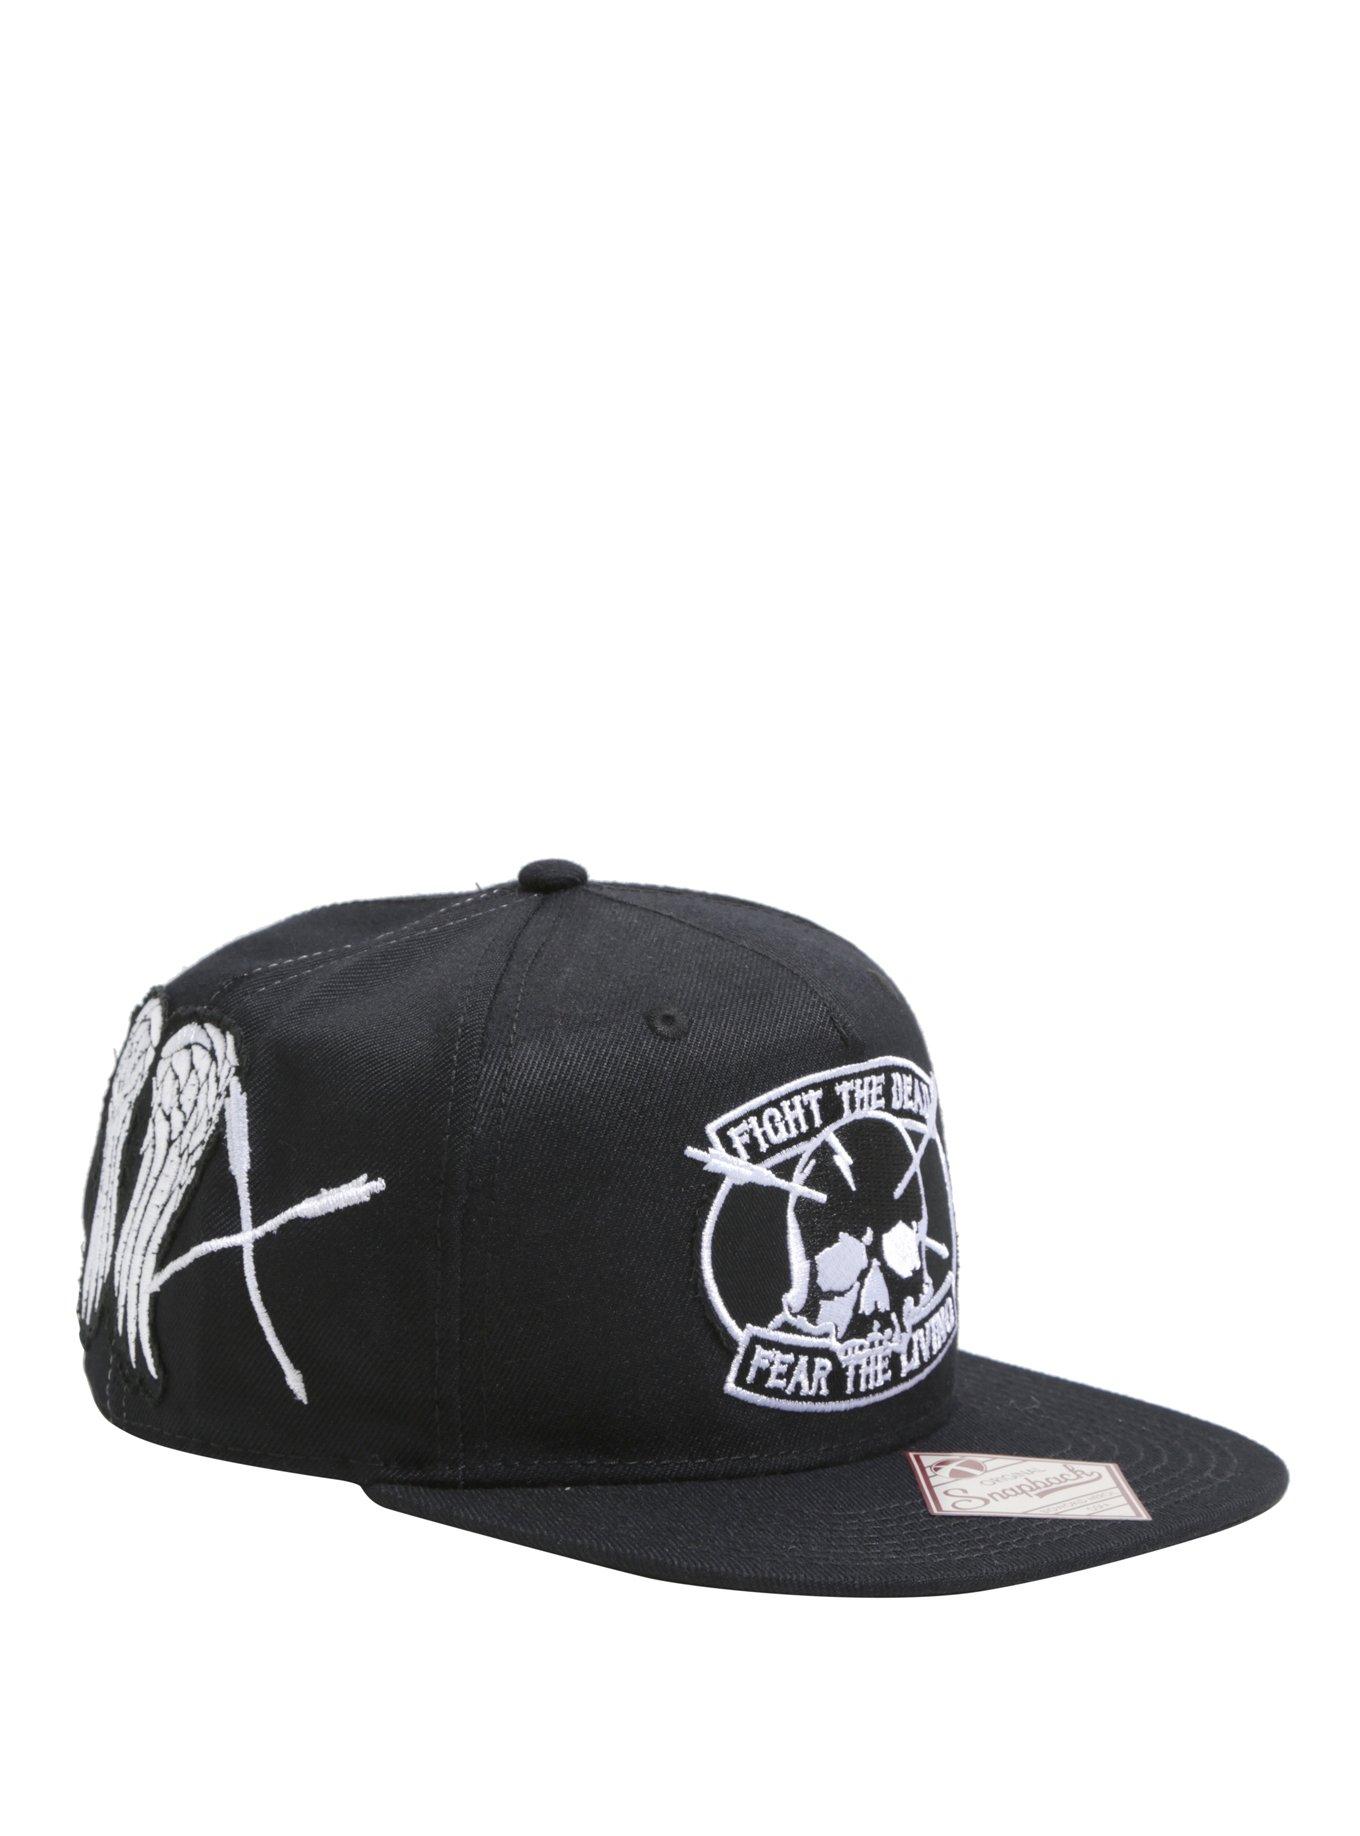 The Walking Dead Fear The Living Snapback Hat | Hot Topic